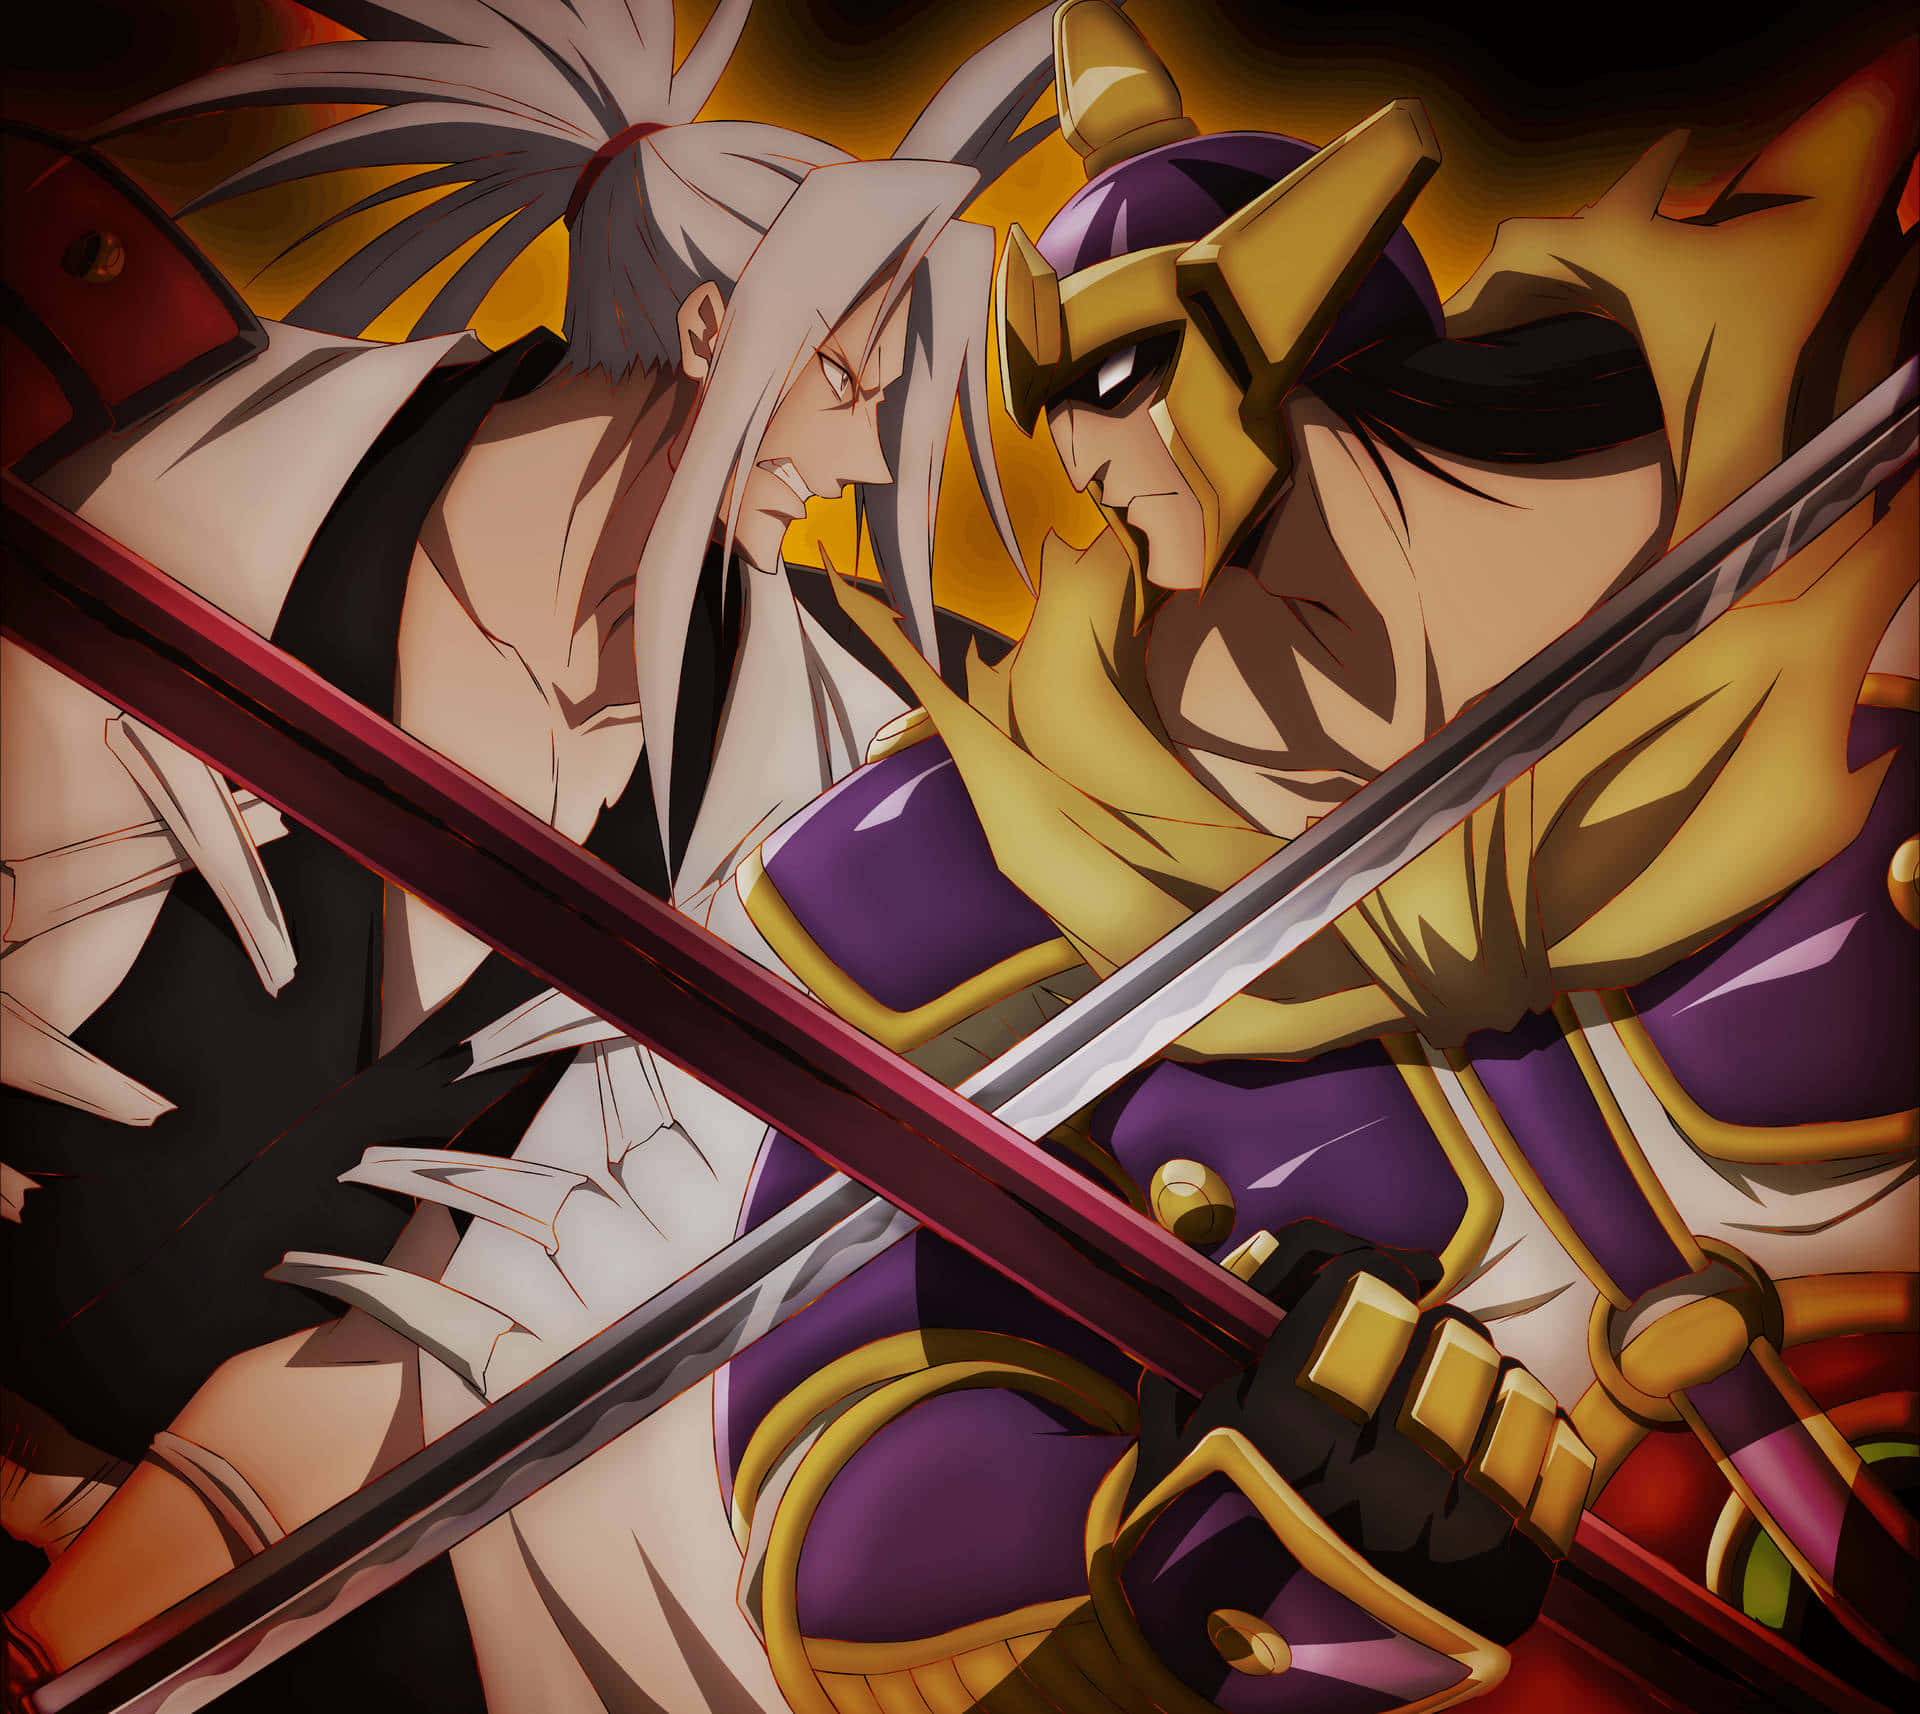 Two warriors battle each other as part of the Shaman Fight in Shaman King